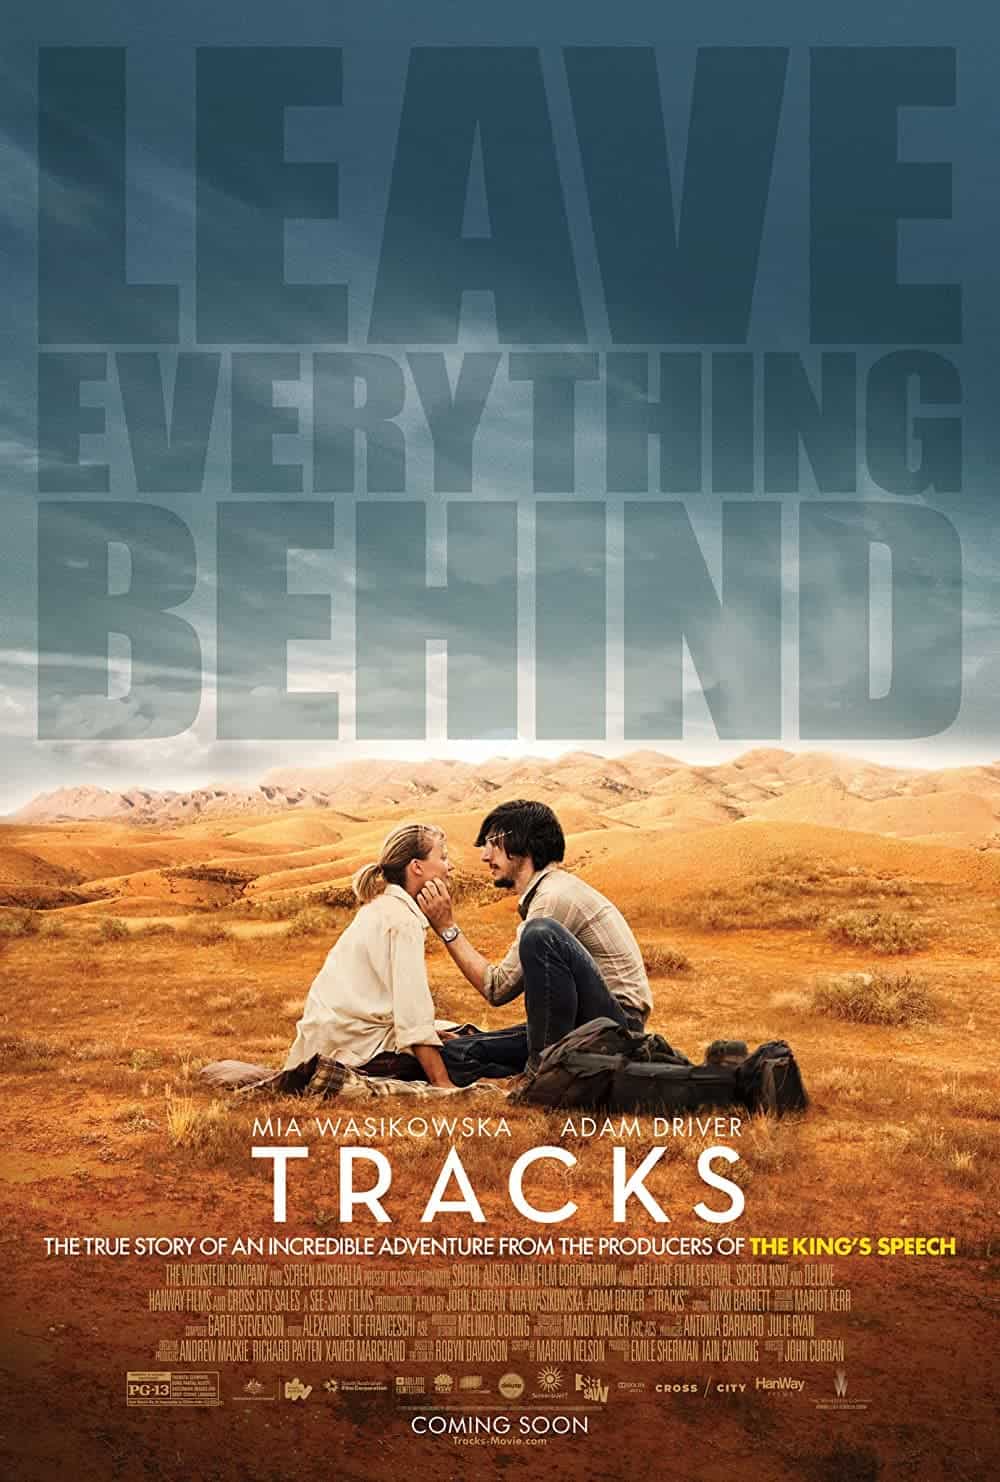 Tracks 2013 15 Best Nature Movies to Add in Your Watchlist